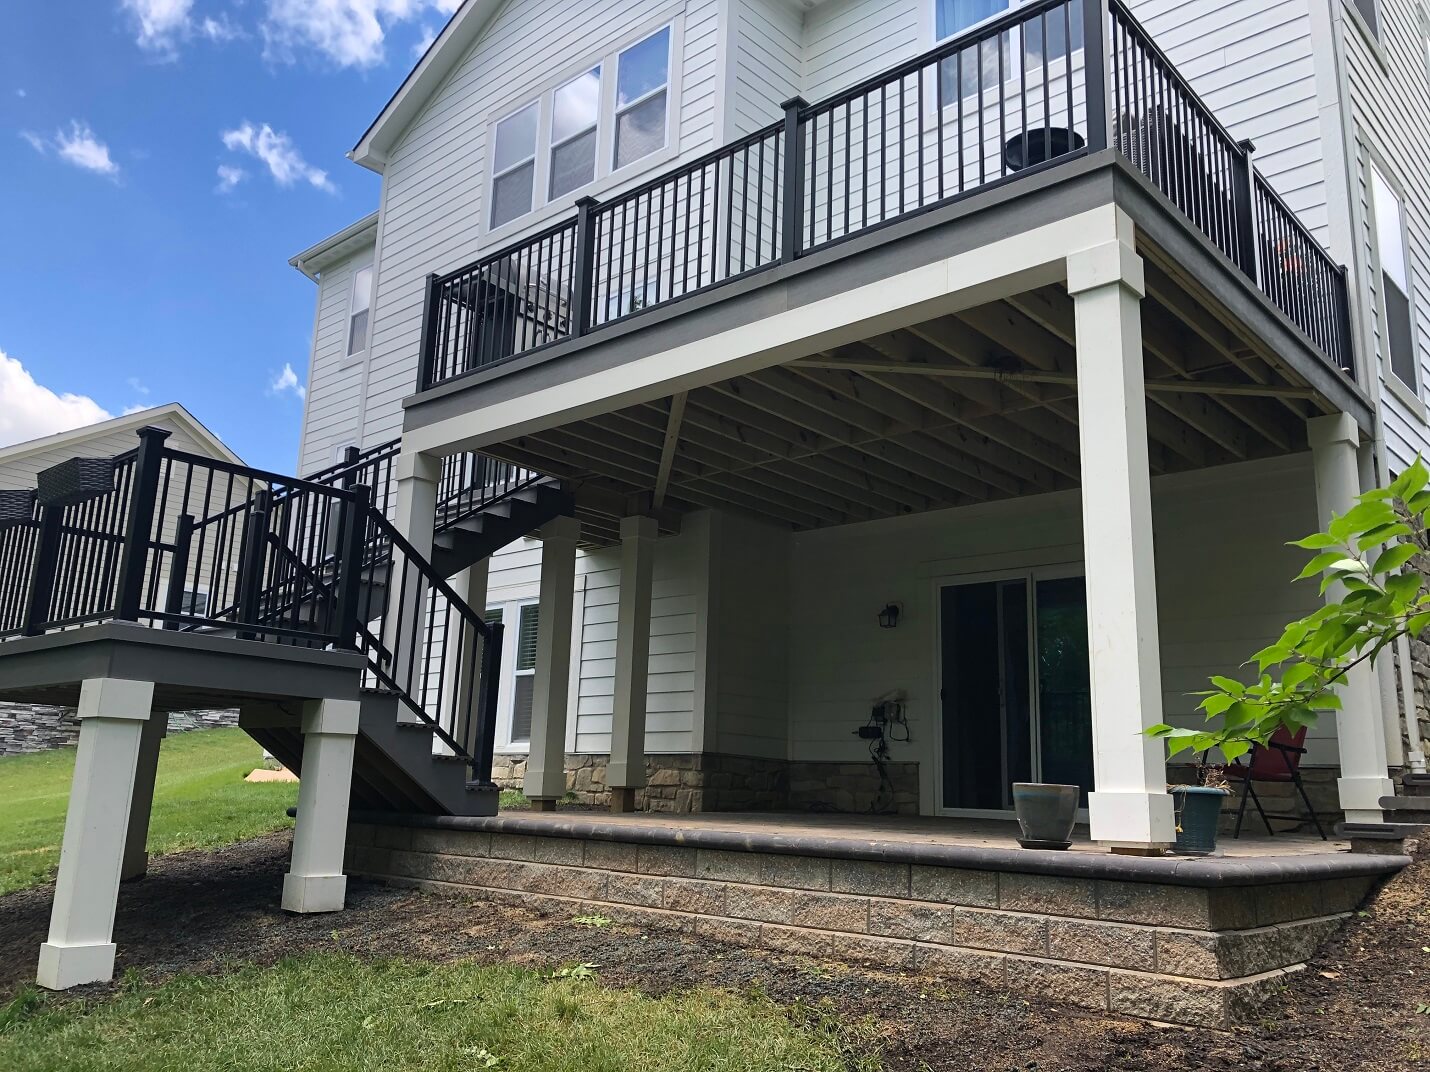 Custom elevated deck with railing and staircase